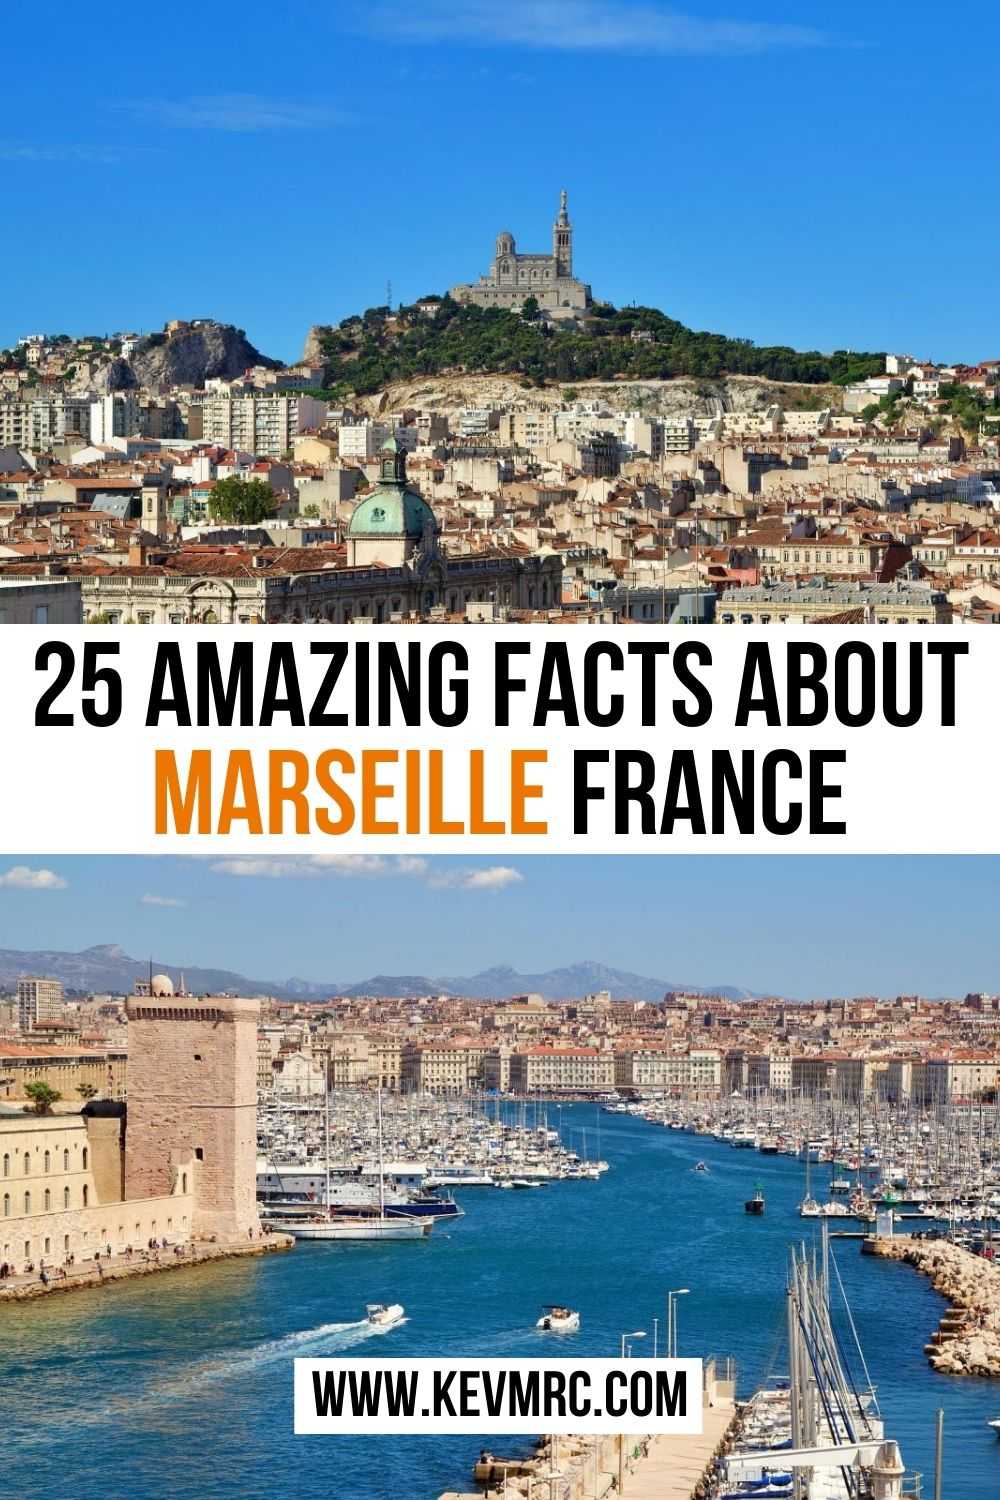 Located in the South of France, Marseille is a beautiful sunny city of the Mediterranean area, where tourists come from all around the world. Learn more about this city through these 25 interesting facts about Marseille France. marseille fun facts | fun facts about marseille